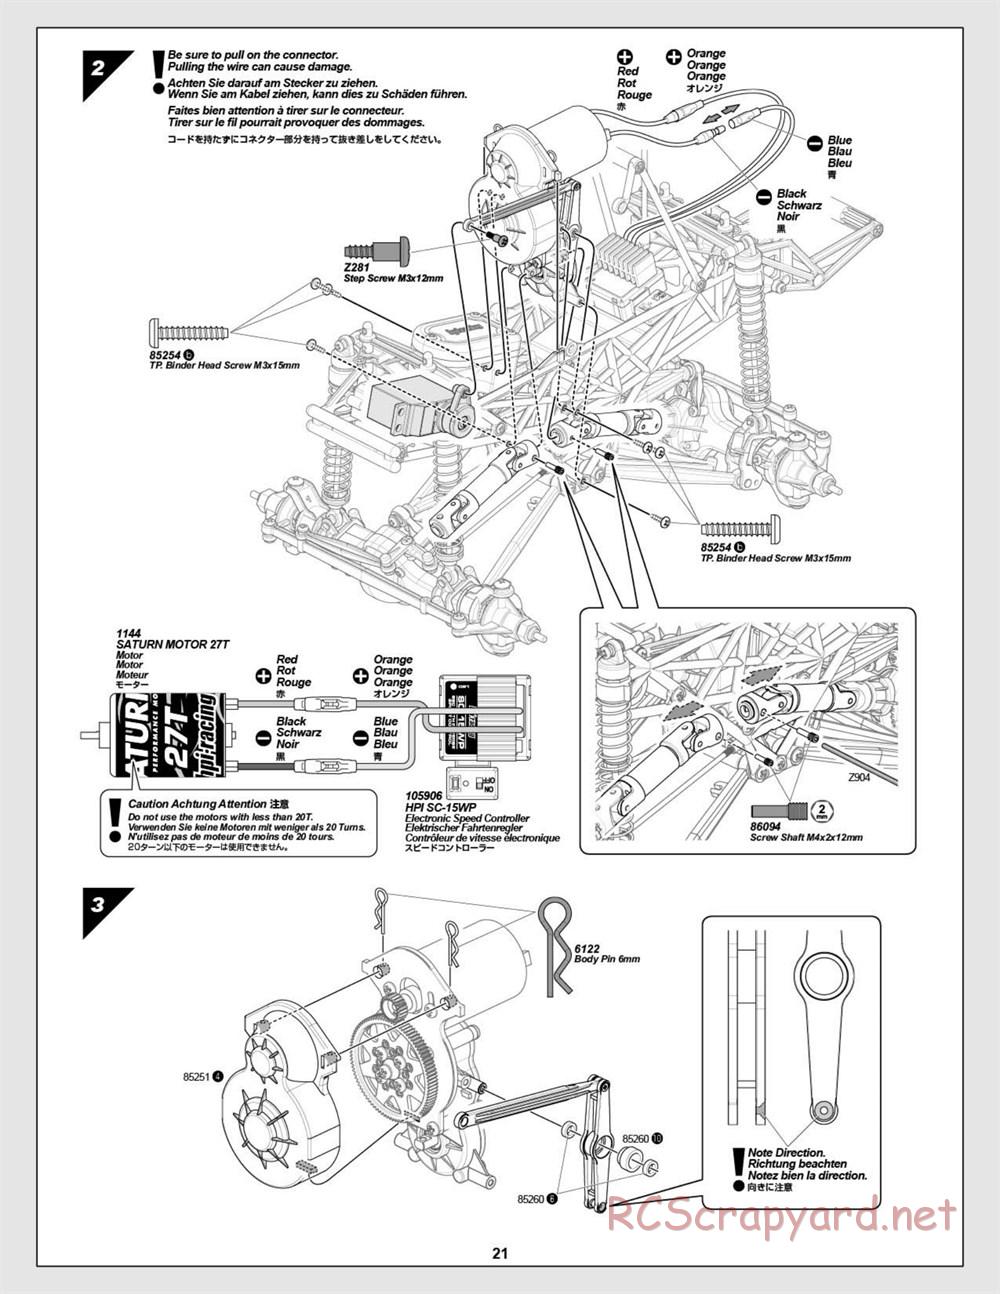 HPI - Wheely King 4x4 - Manual - Page 21